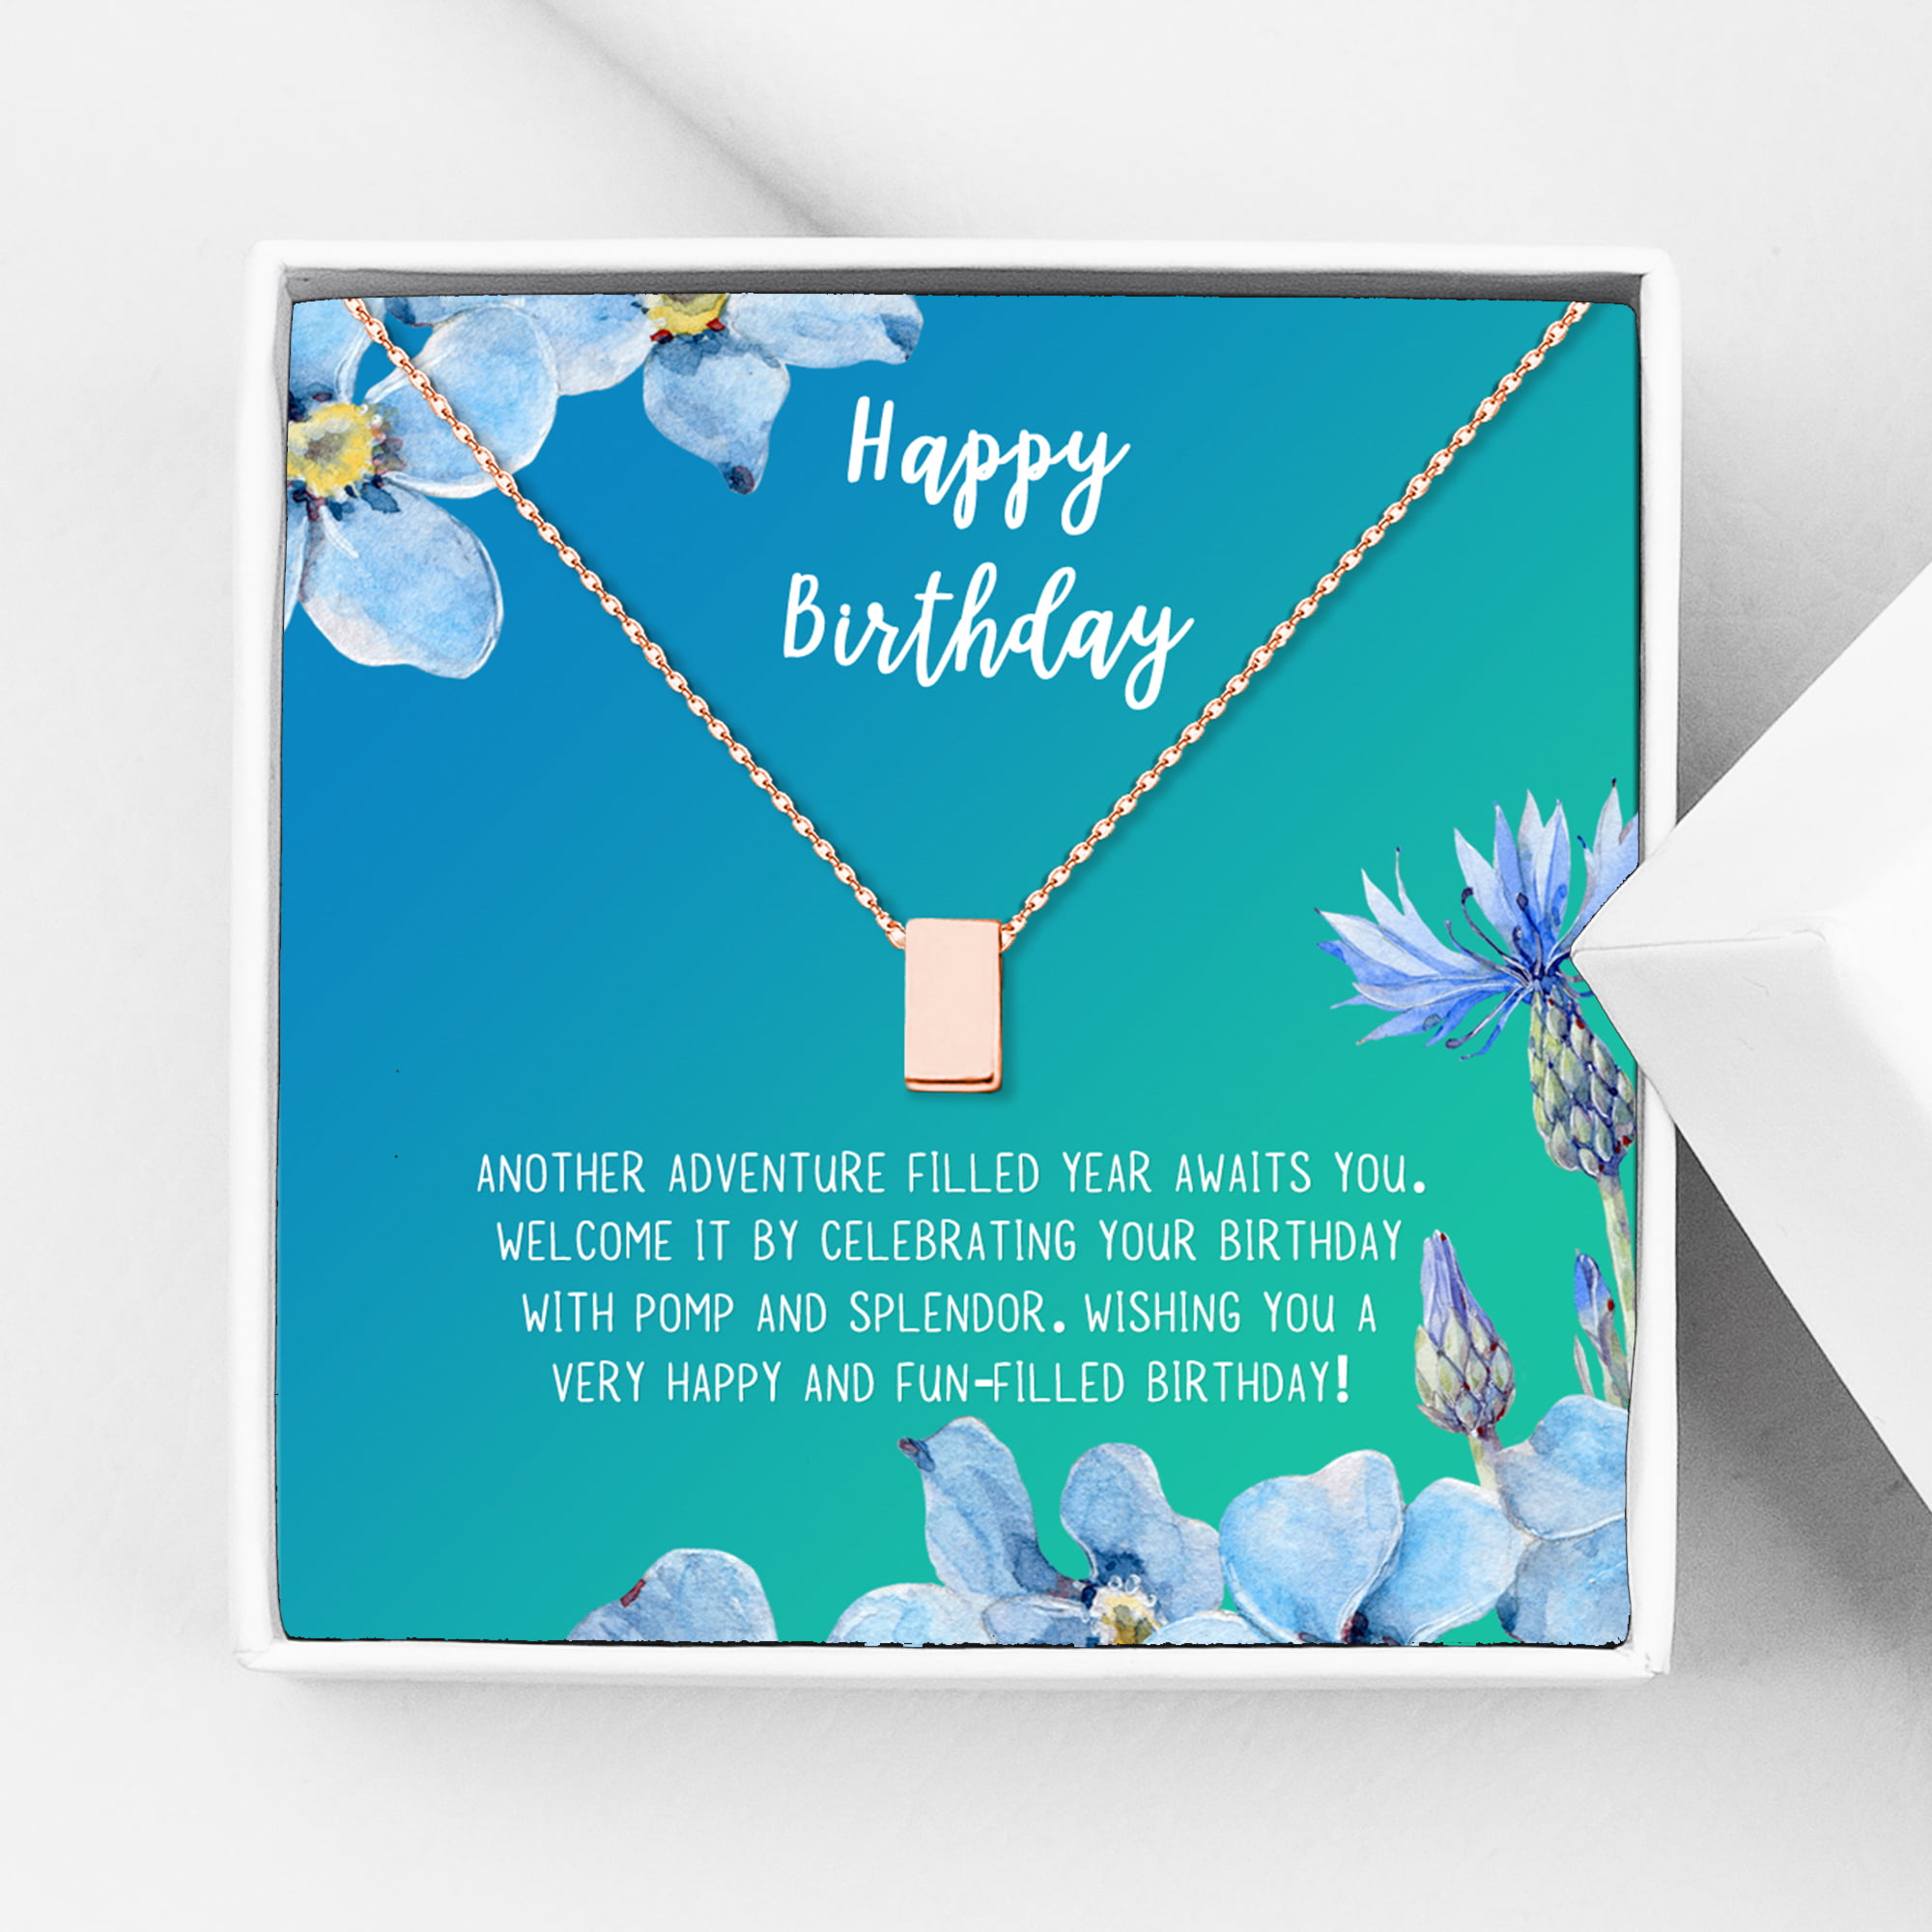 Details about   Personalised Anniversary Card Funny Gifts For Her Him Girlfriend Boyfriend 